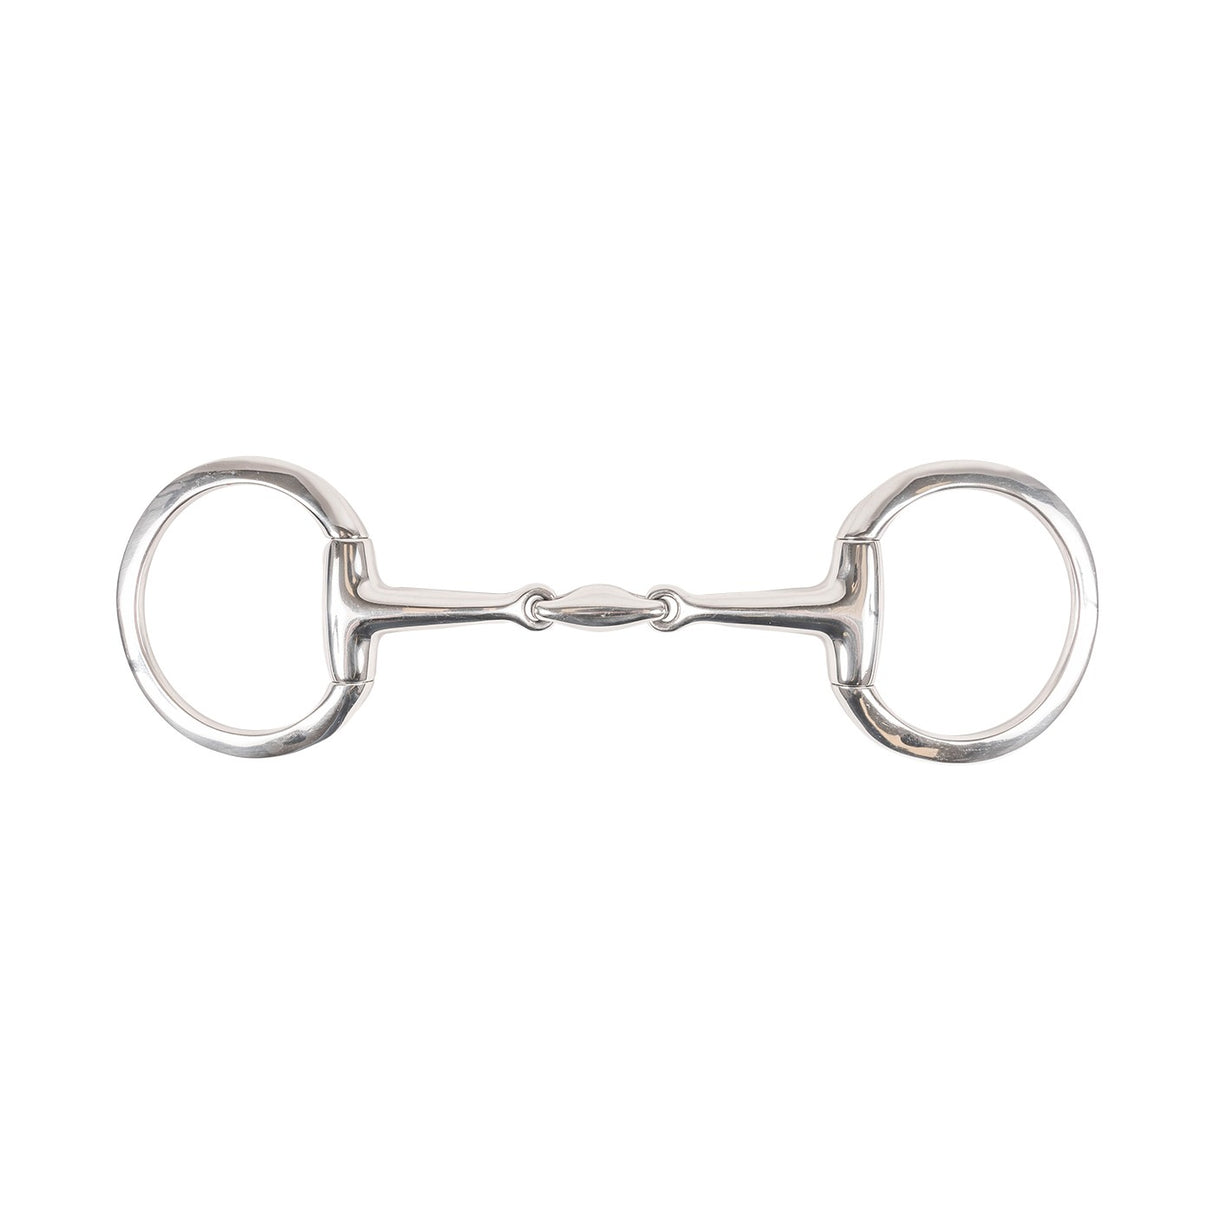 Eggbutt Double Jointed Snaffle 16 mm